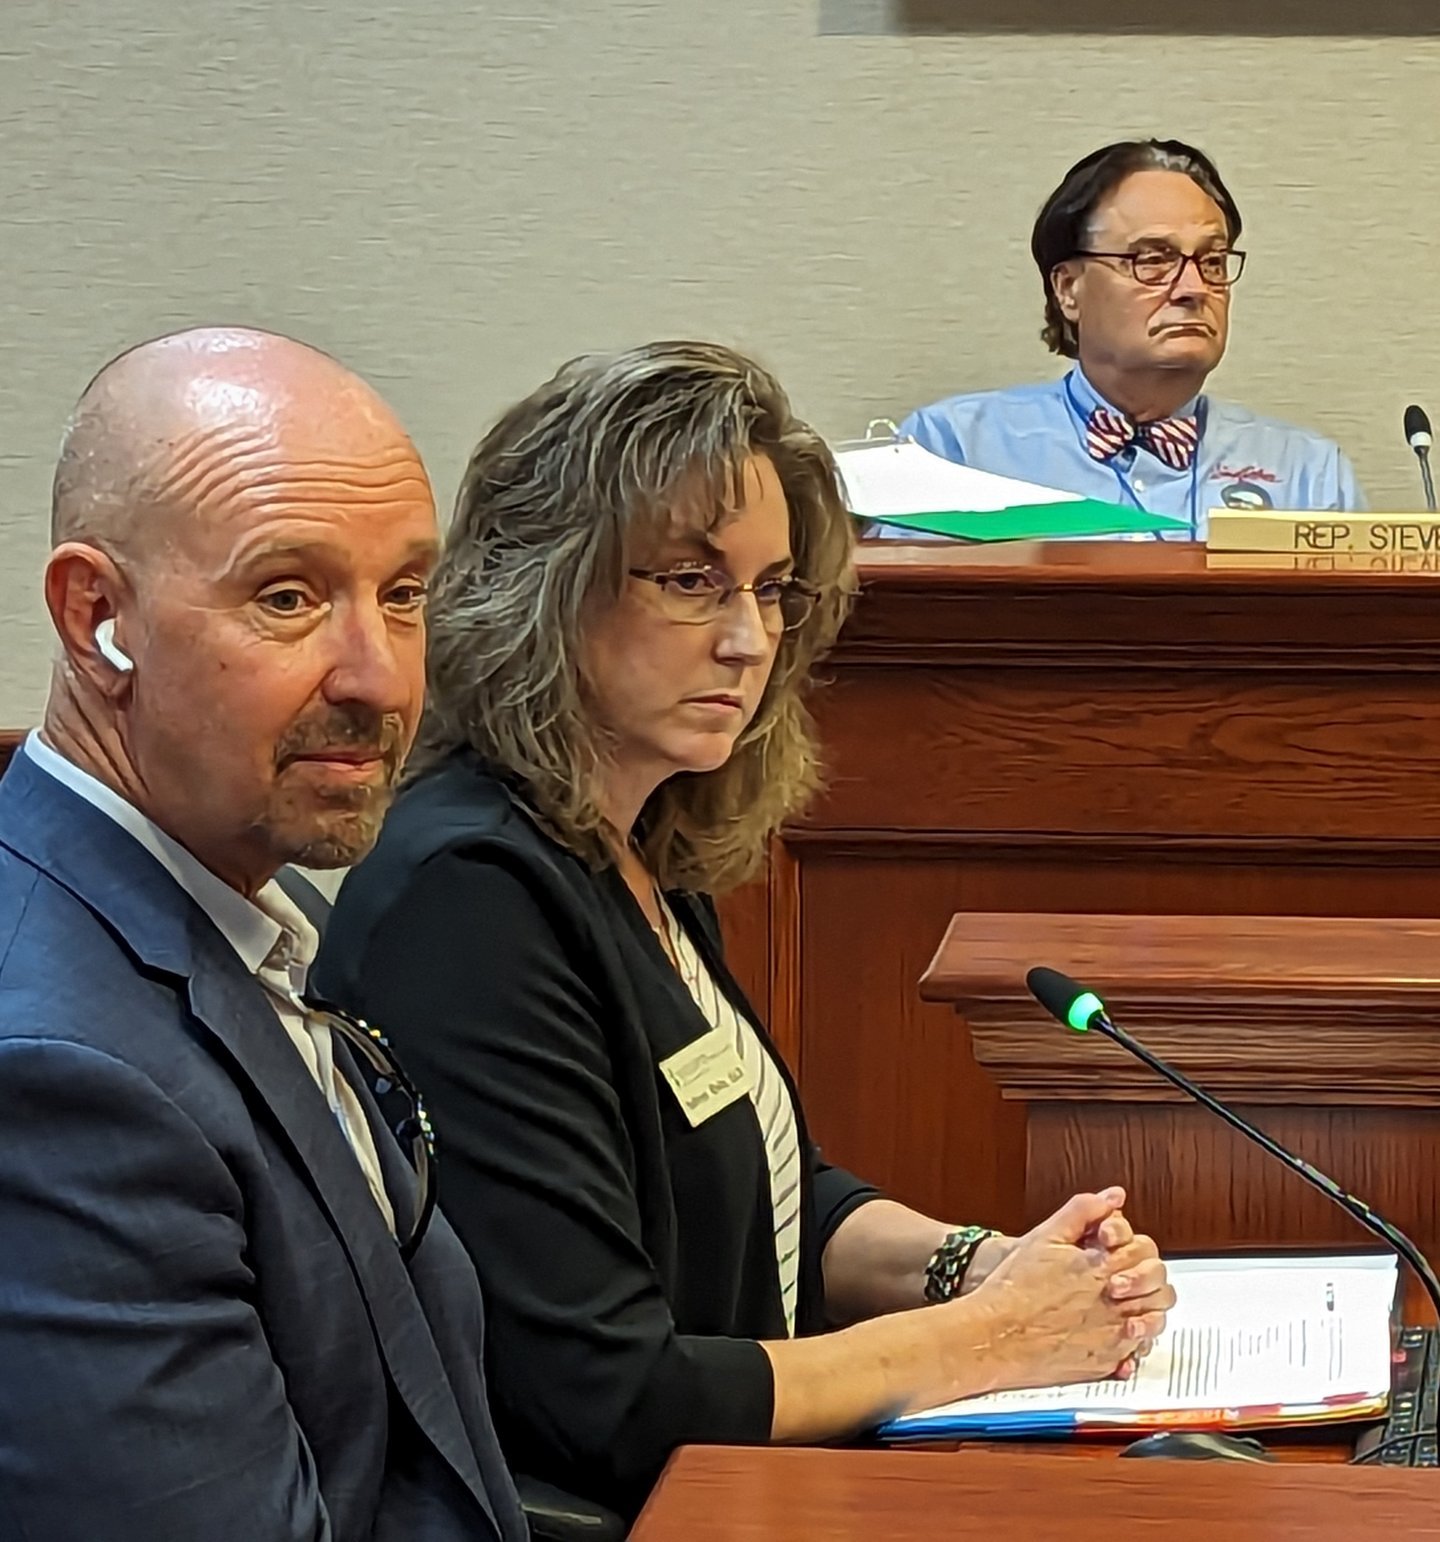 Pat Snow, state government's chief technology officer, and Kathryn Blaha, certification director for the state Department of Education, spoke with South Dakota legislators Monday about delays at the department in processing hundreds of teacher certification applications.